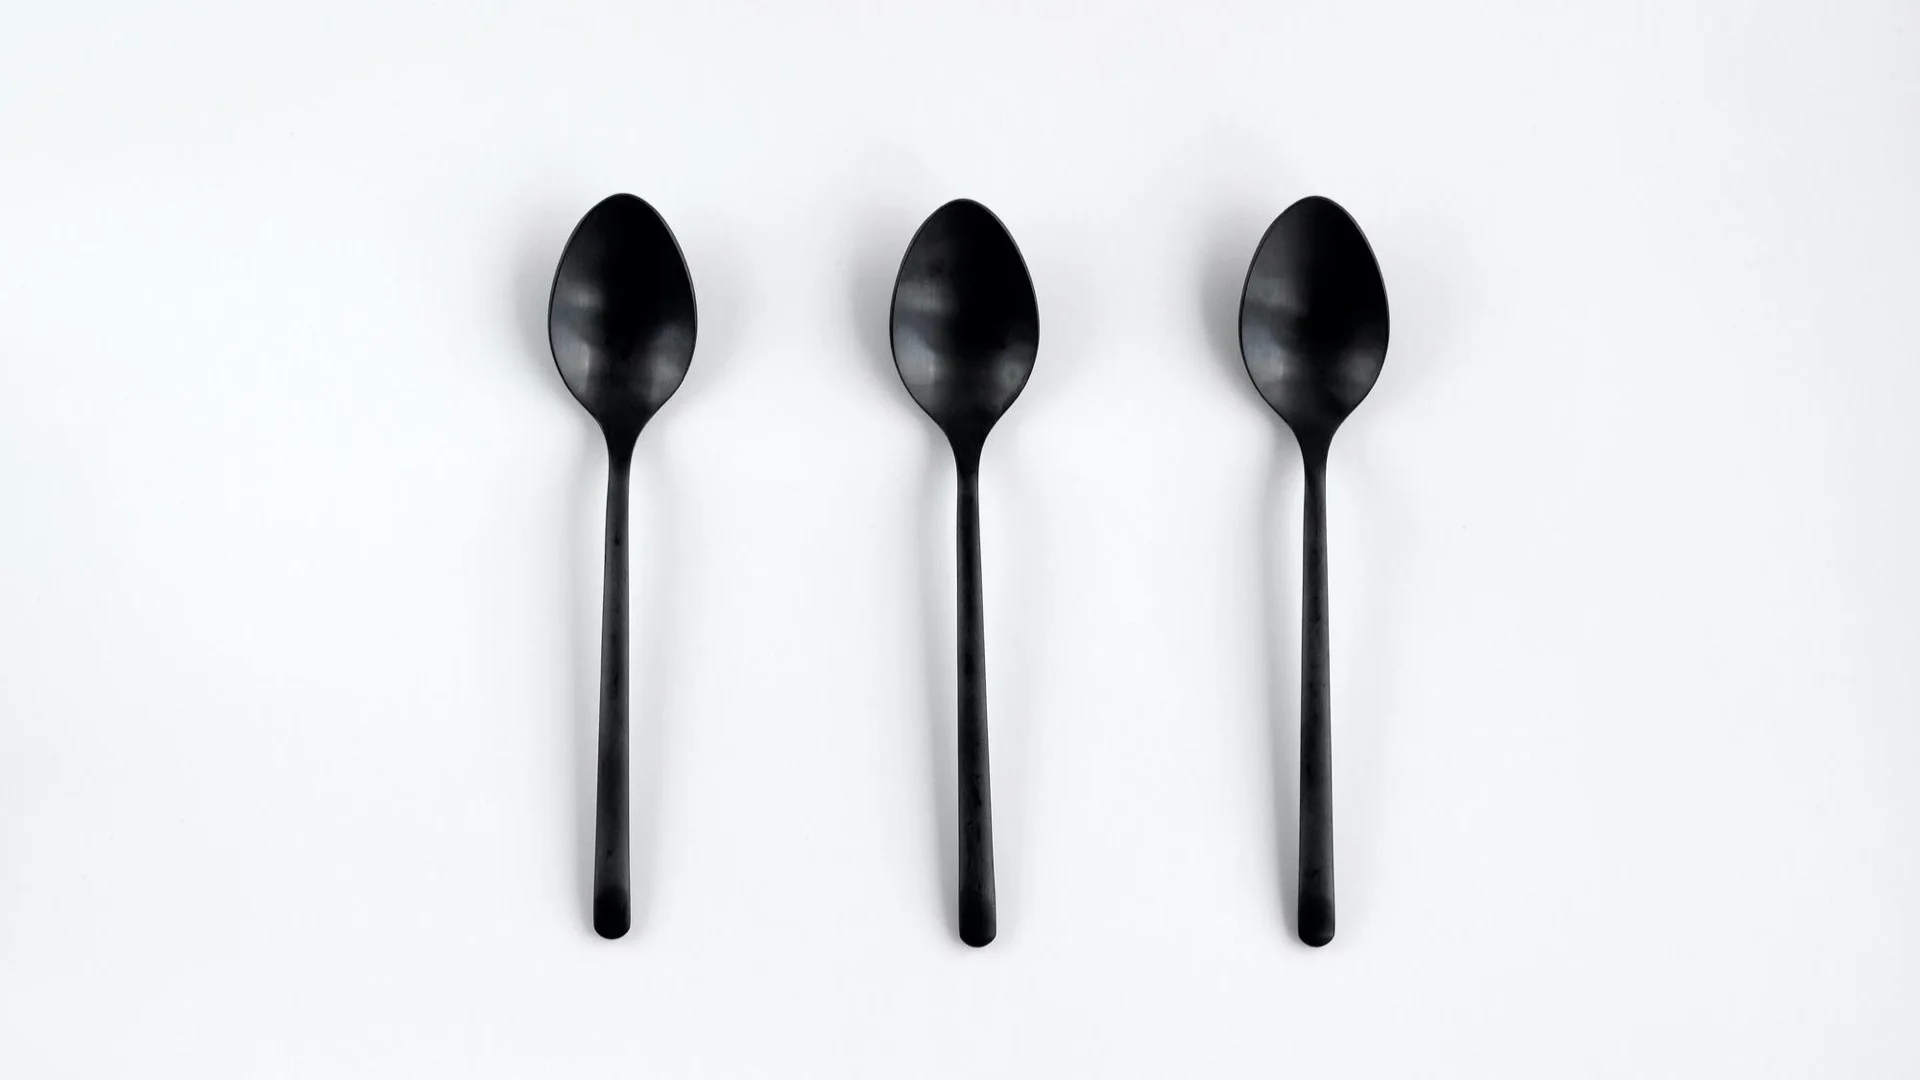 How Many Teaspoons in a Tablespoon?